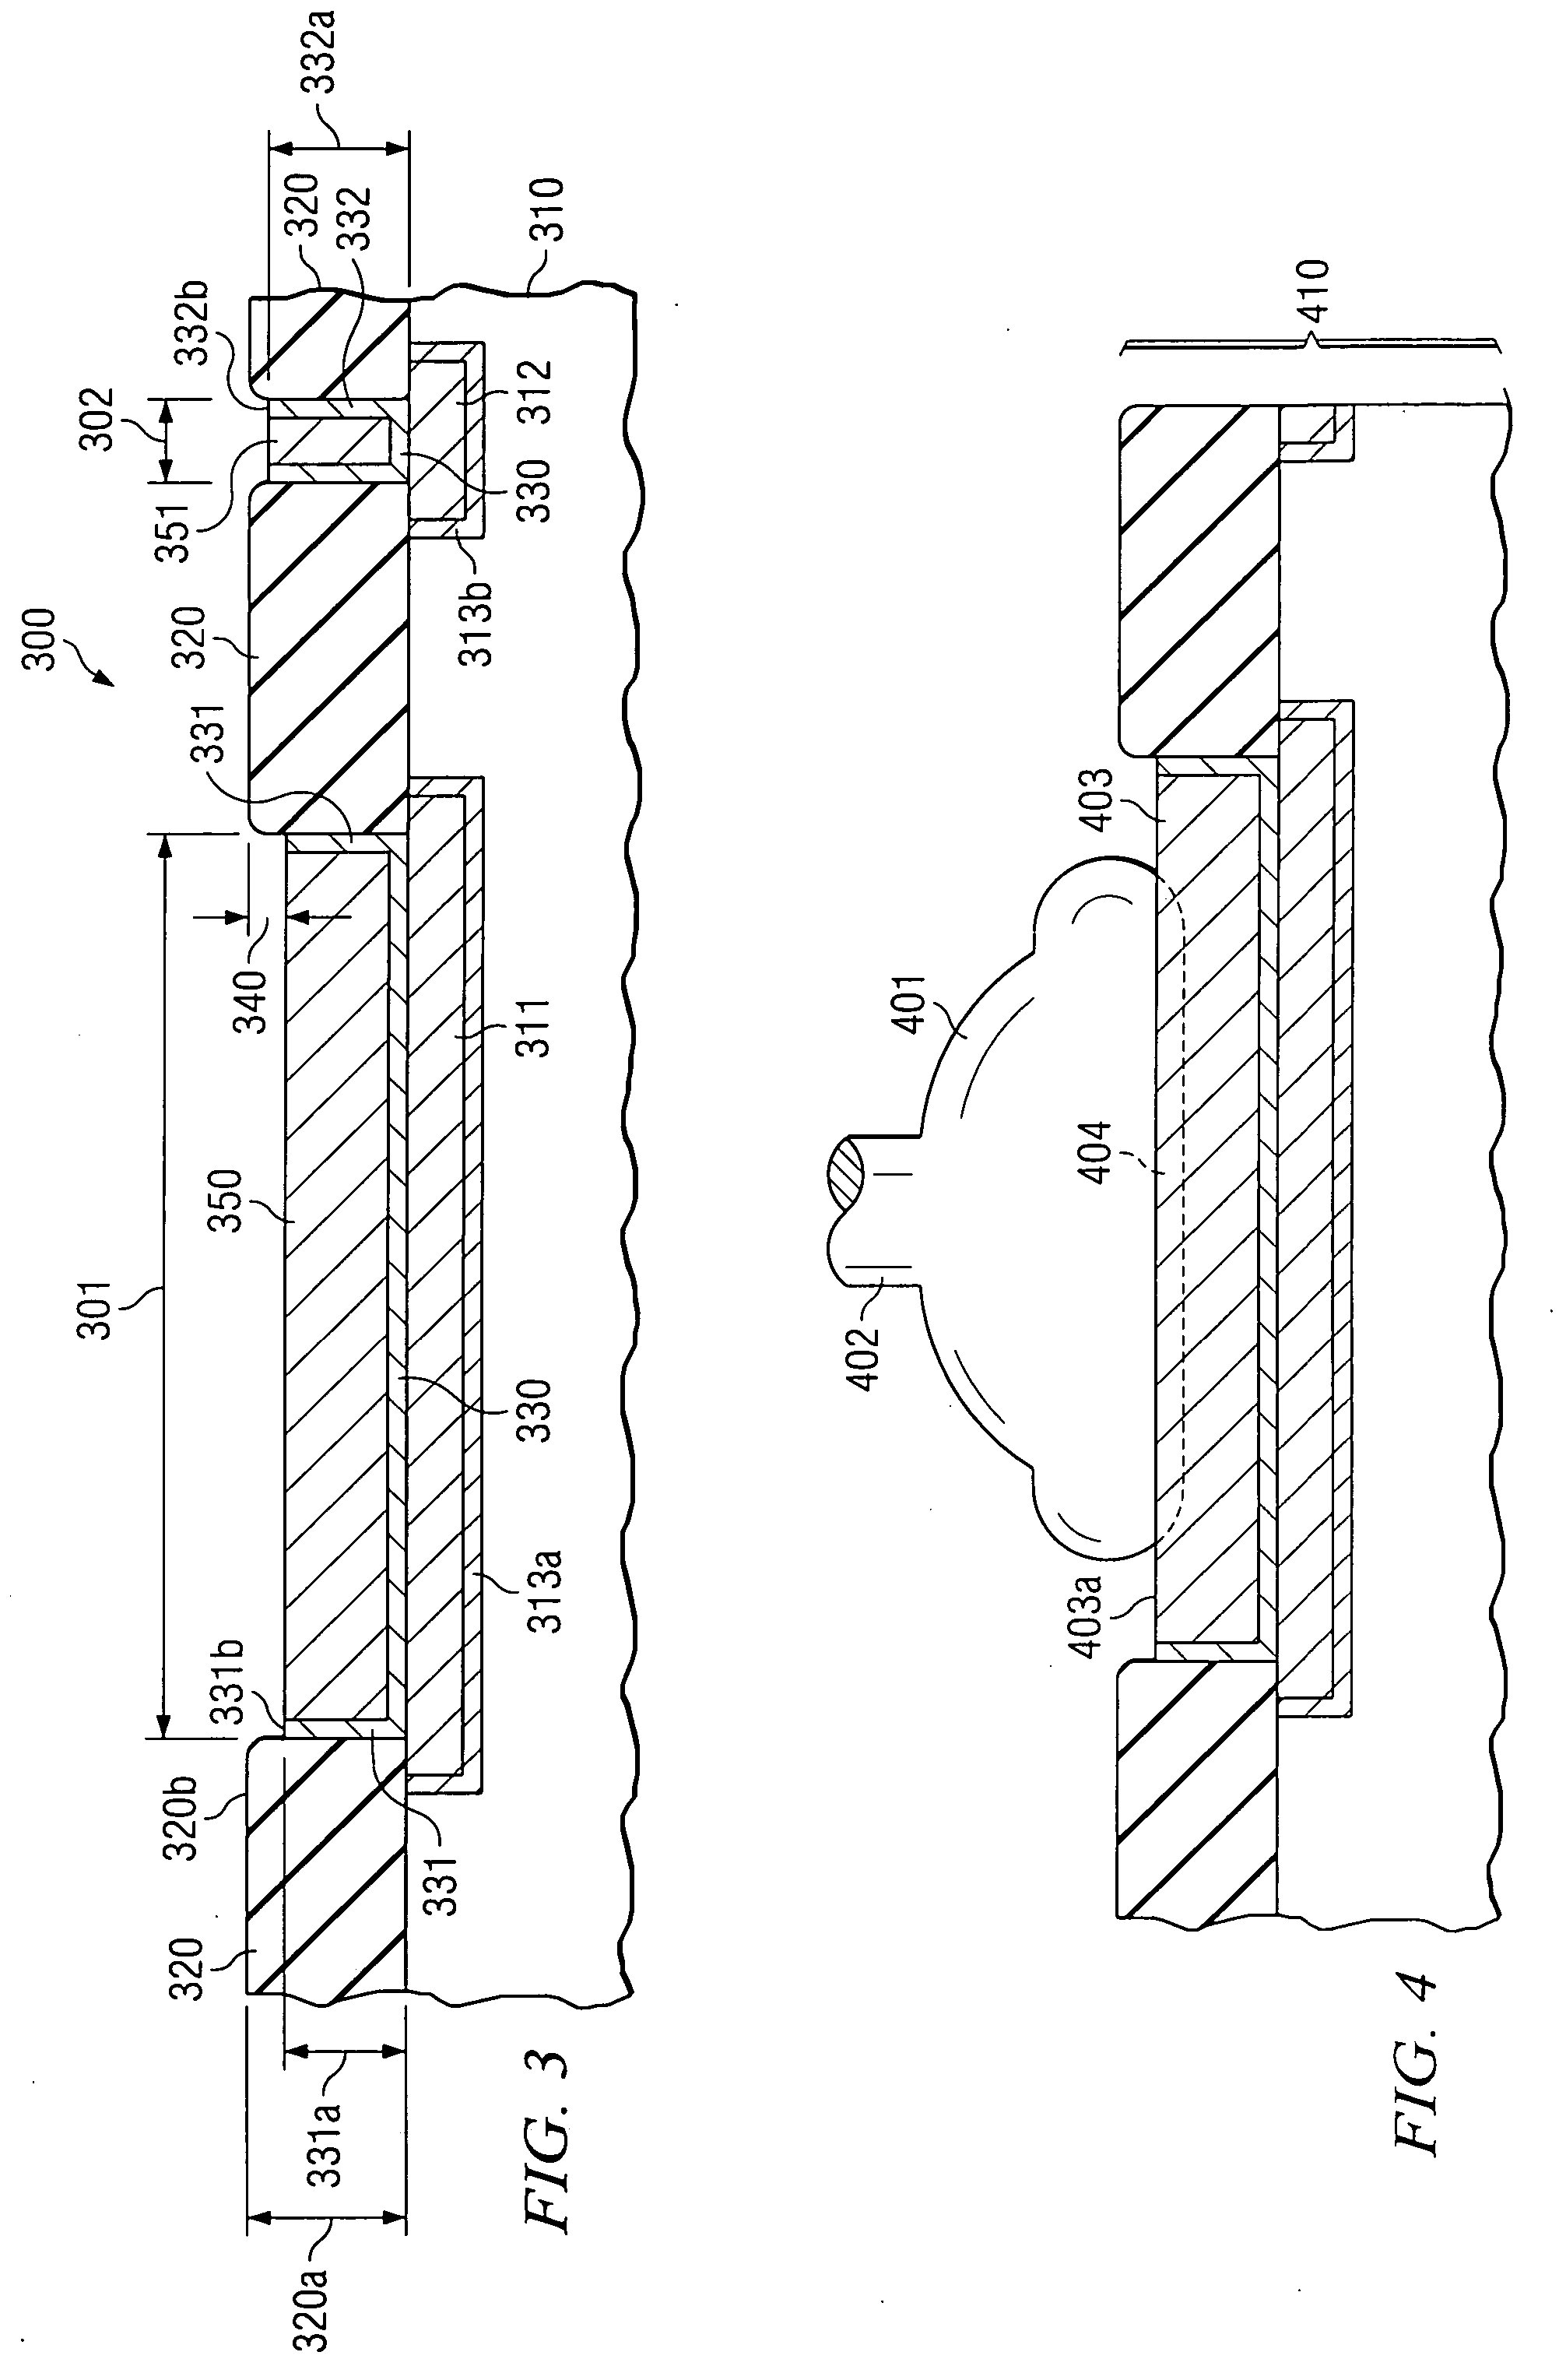 Structure and method for contact pads having a recessed bondable metal plug over of copper-metallized integrated circuits